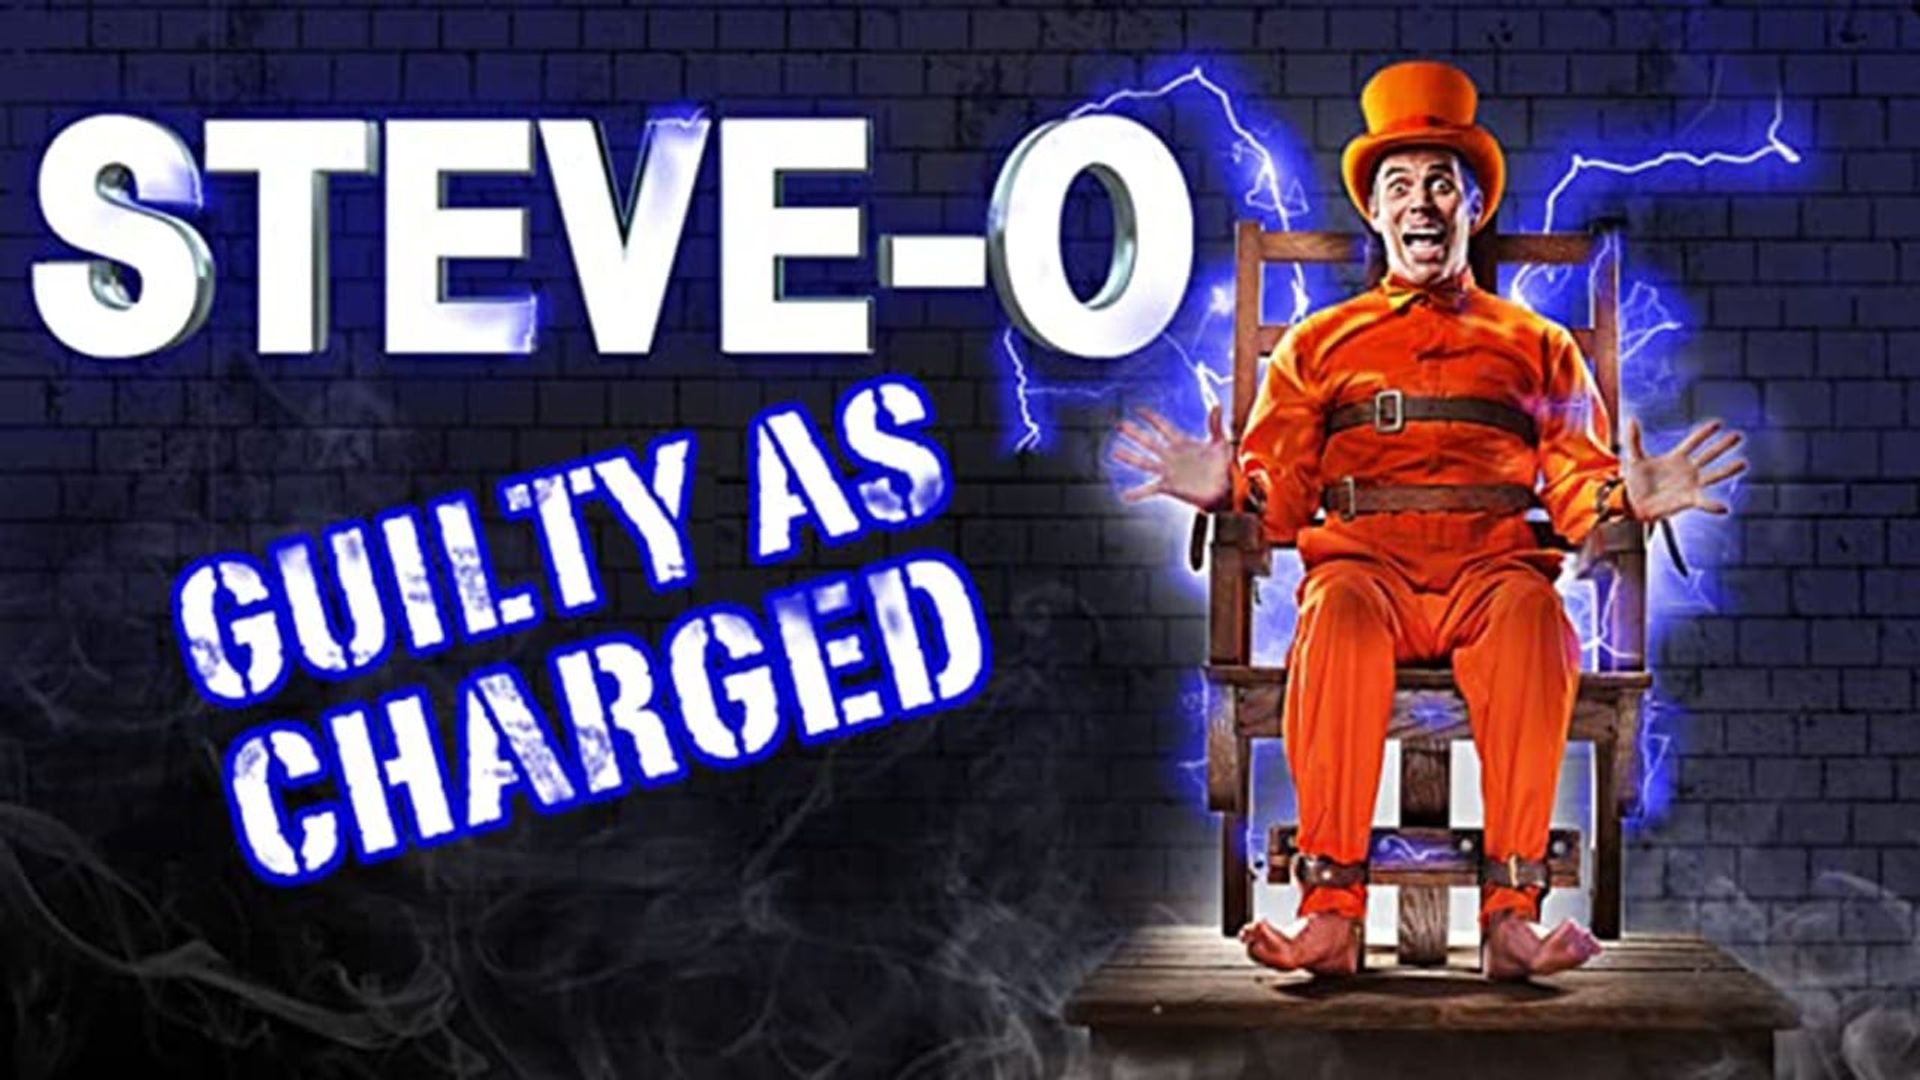 Steve-O: Guilty as Charged background